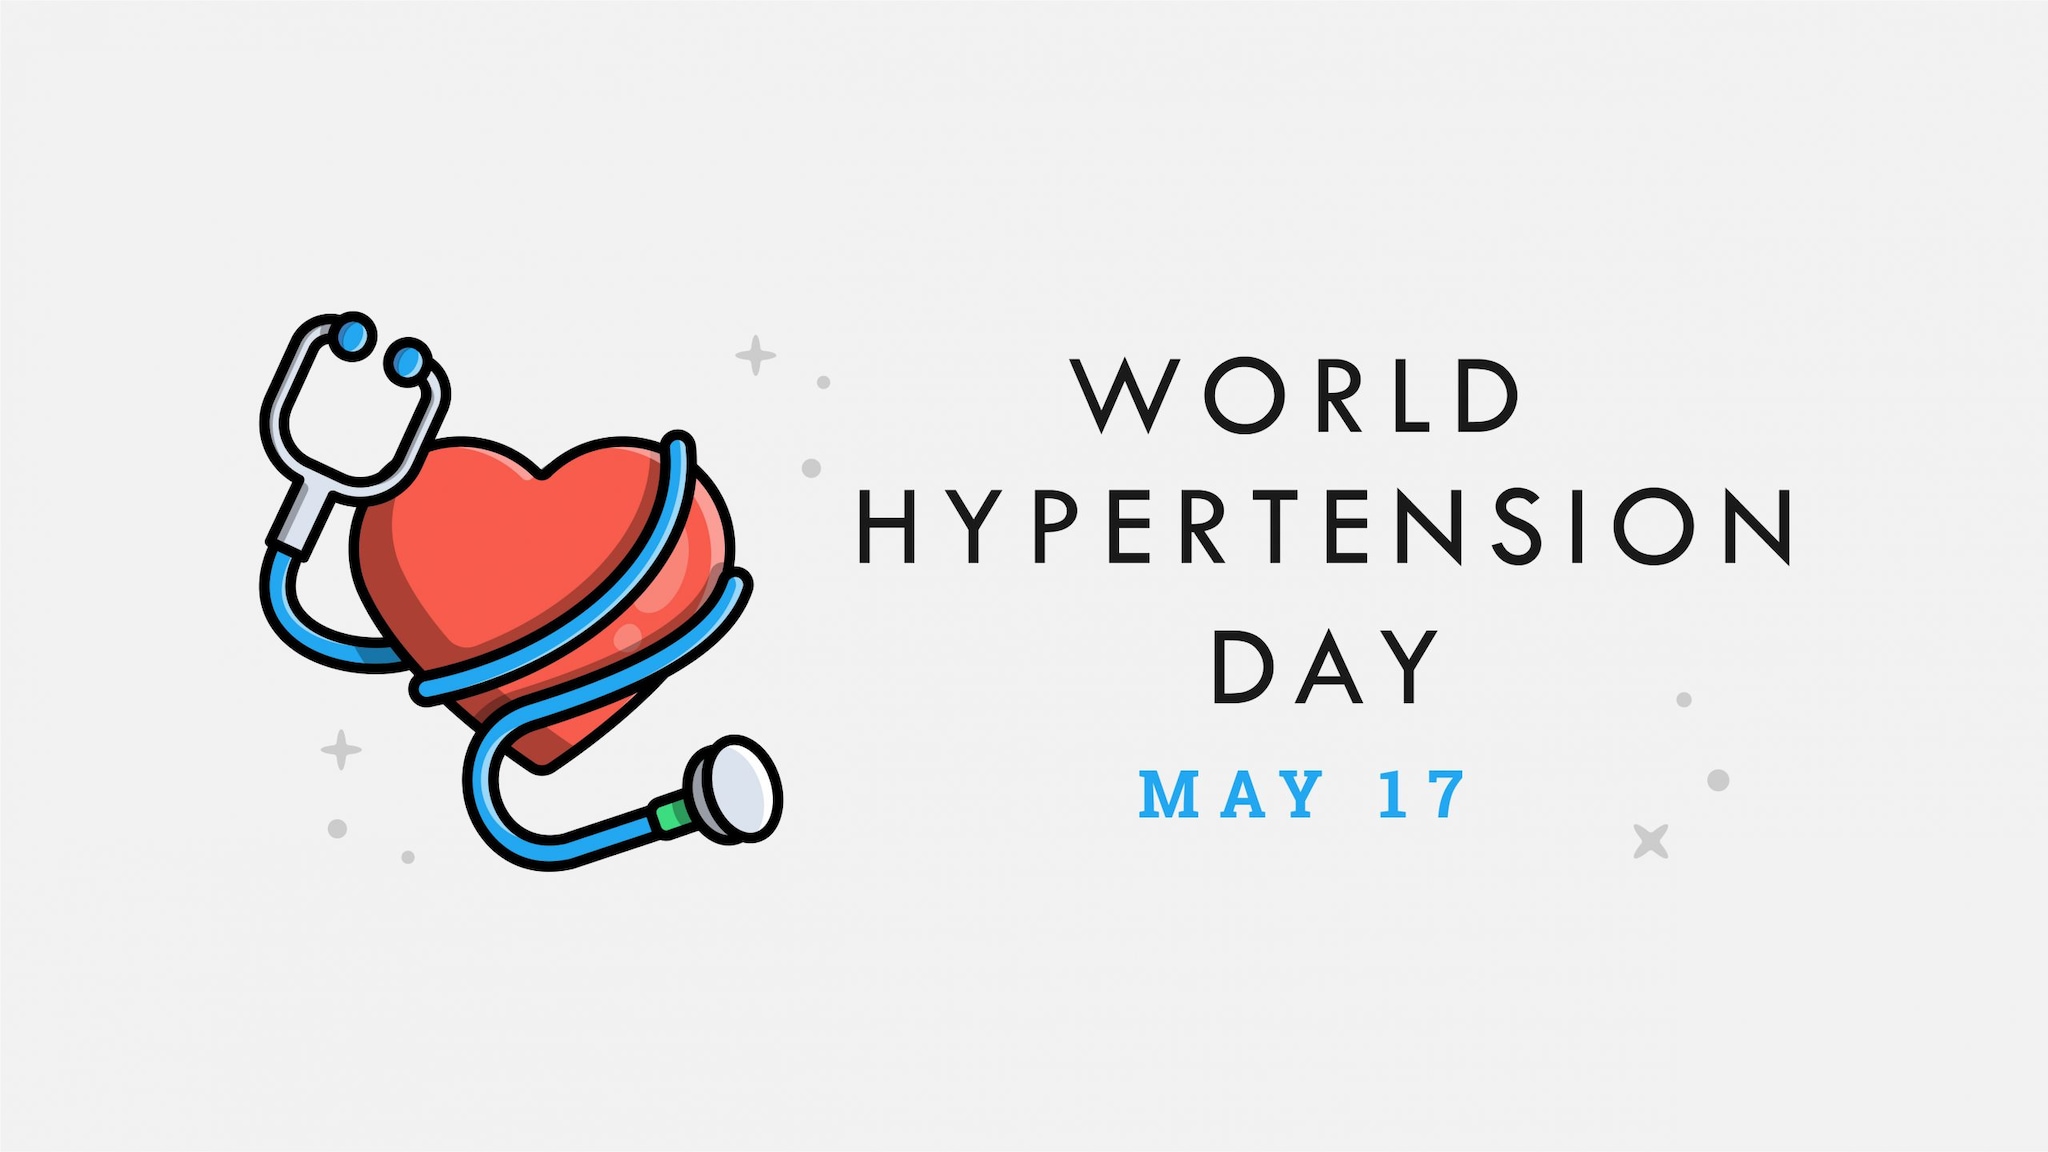 World Hypertension Day May 17 Division of Global Health Protection